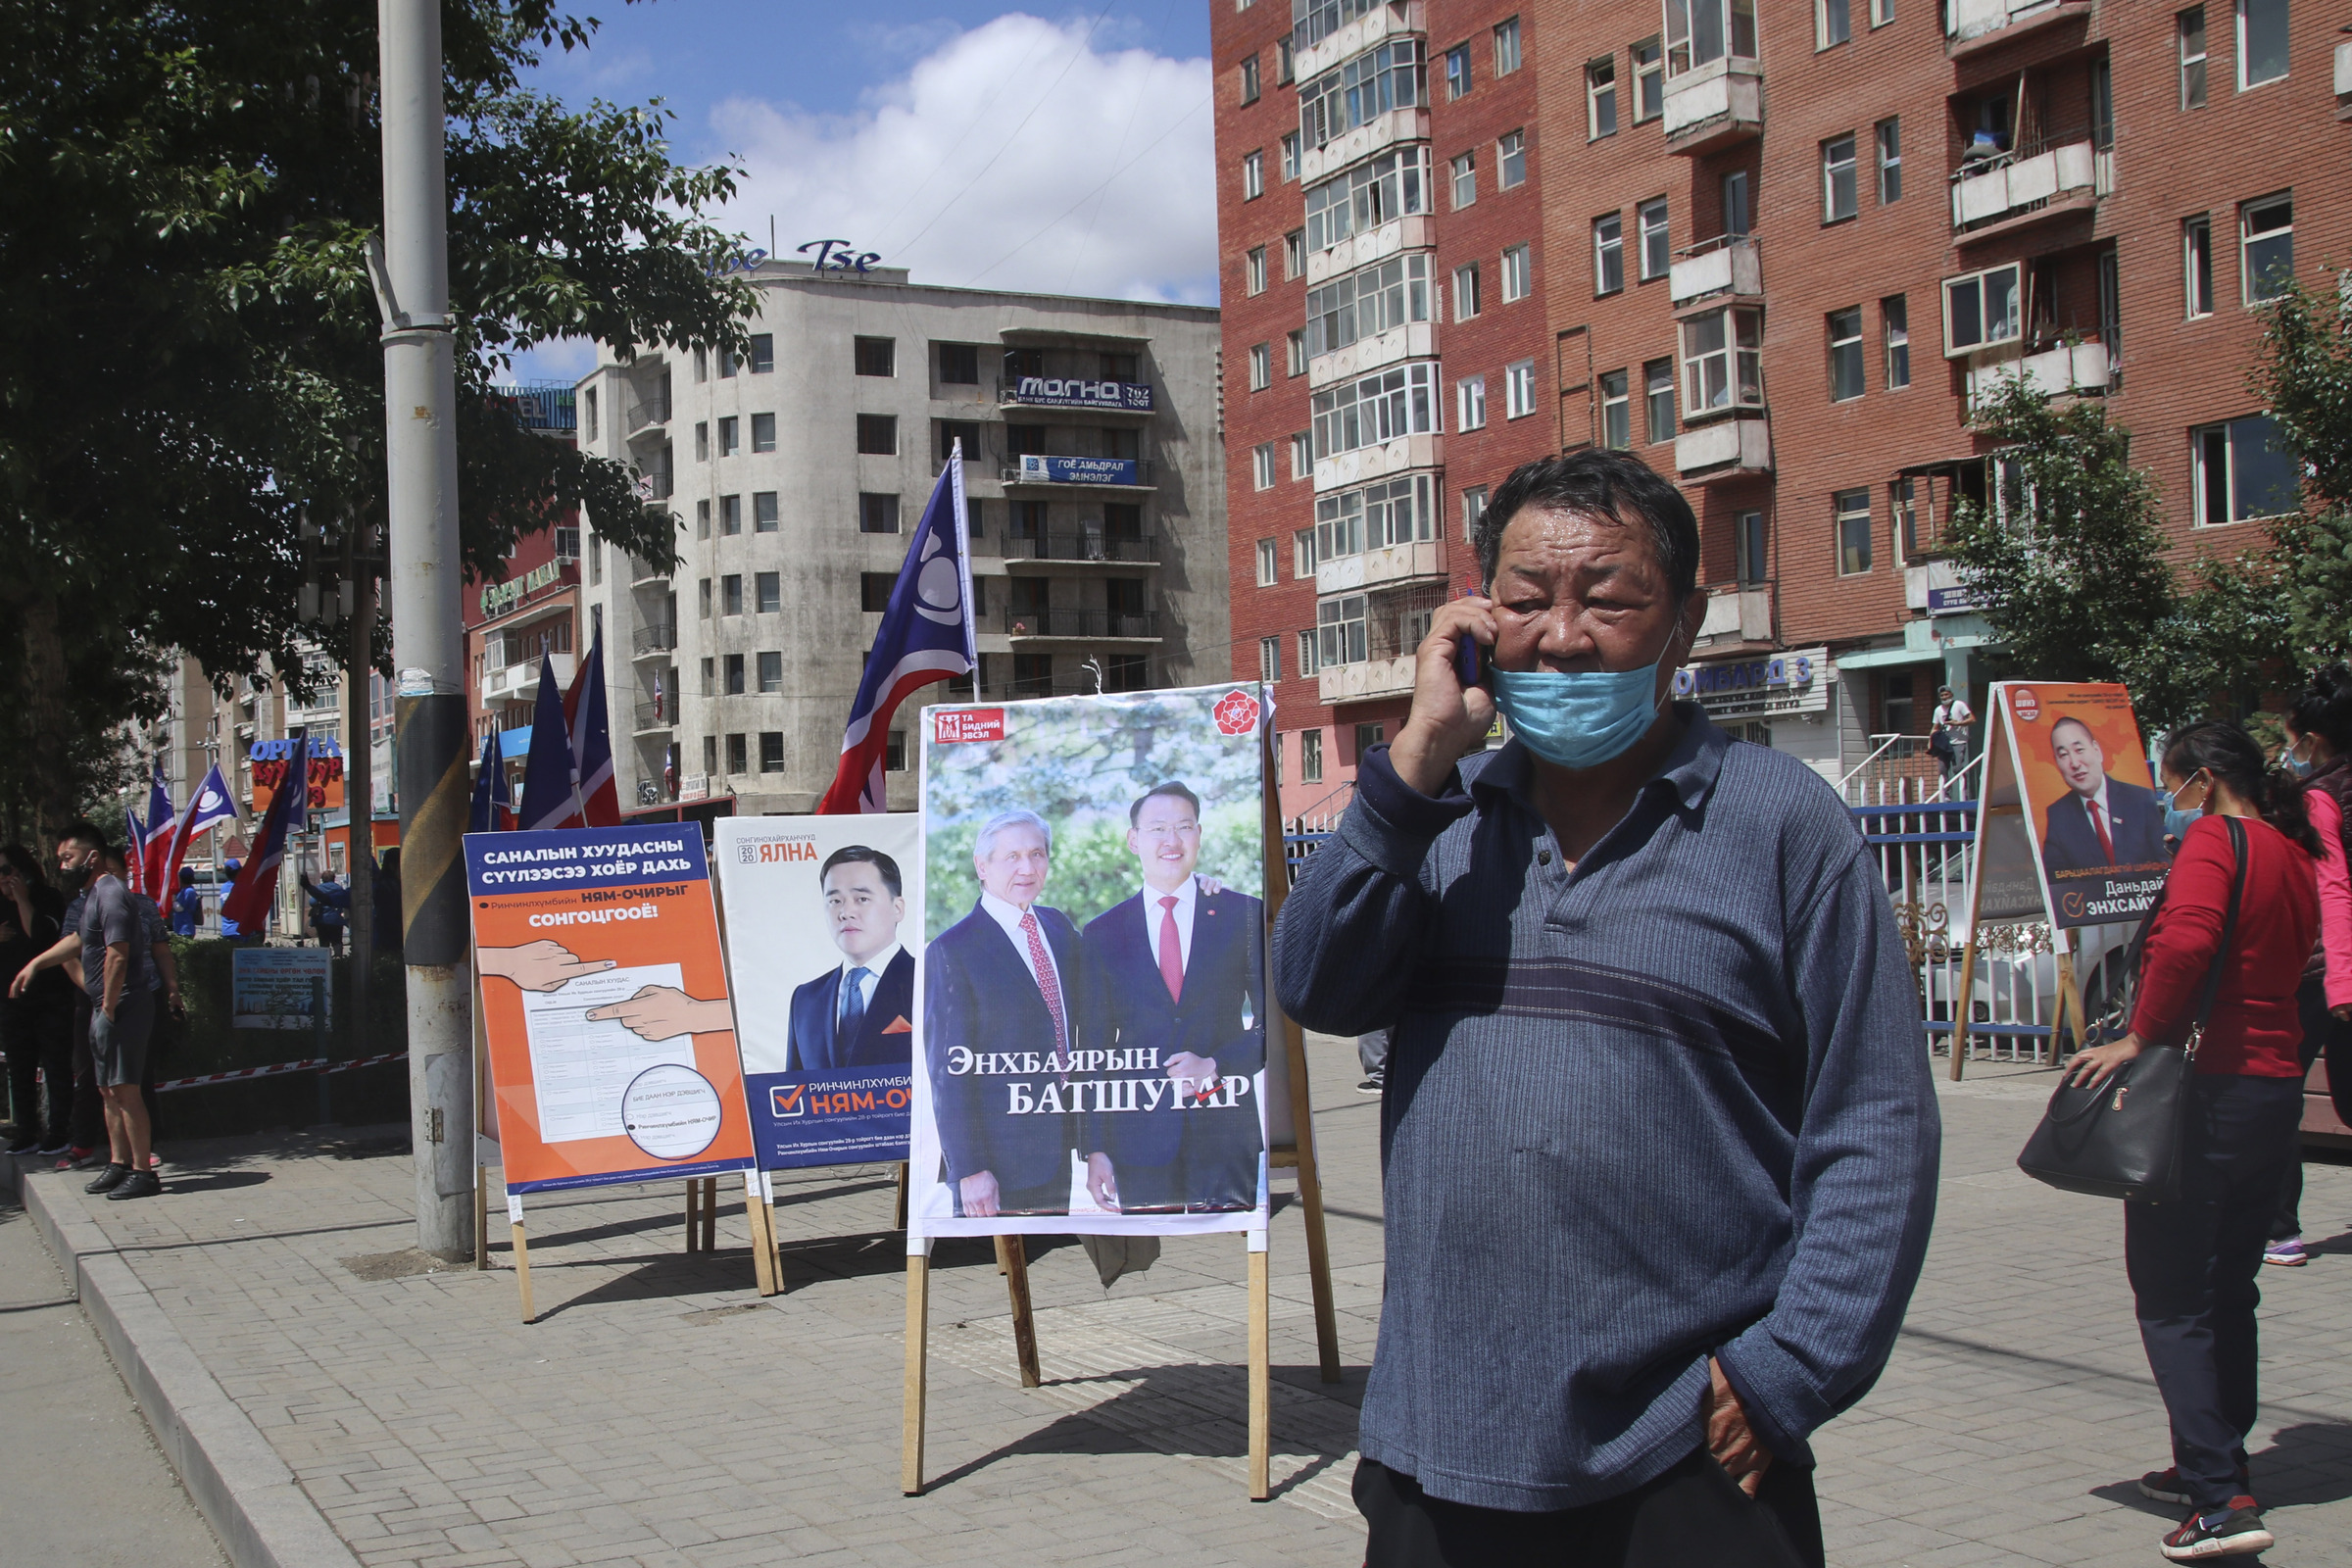 A man wearing a mask and using his phone stands near the election stand of Mongolian People's Revolutionary Party or MPRP featuring ex-president of Mongolia Enkhbayar Nambar and his son Batshugar in the Songinokhairkhan district on the outskirt of Ulaanbaatar, Mongolia, Monday, June 22, 2020. Mongolia holds parliamentary elections on Wednesday, continuing a nearly 30-year democratic system in a vast but lightly populated country sandwiched between authoritarian regimes in Russia and China and beset by economic problems. (AP Photo/Ganbat Namjilsangarav)